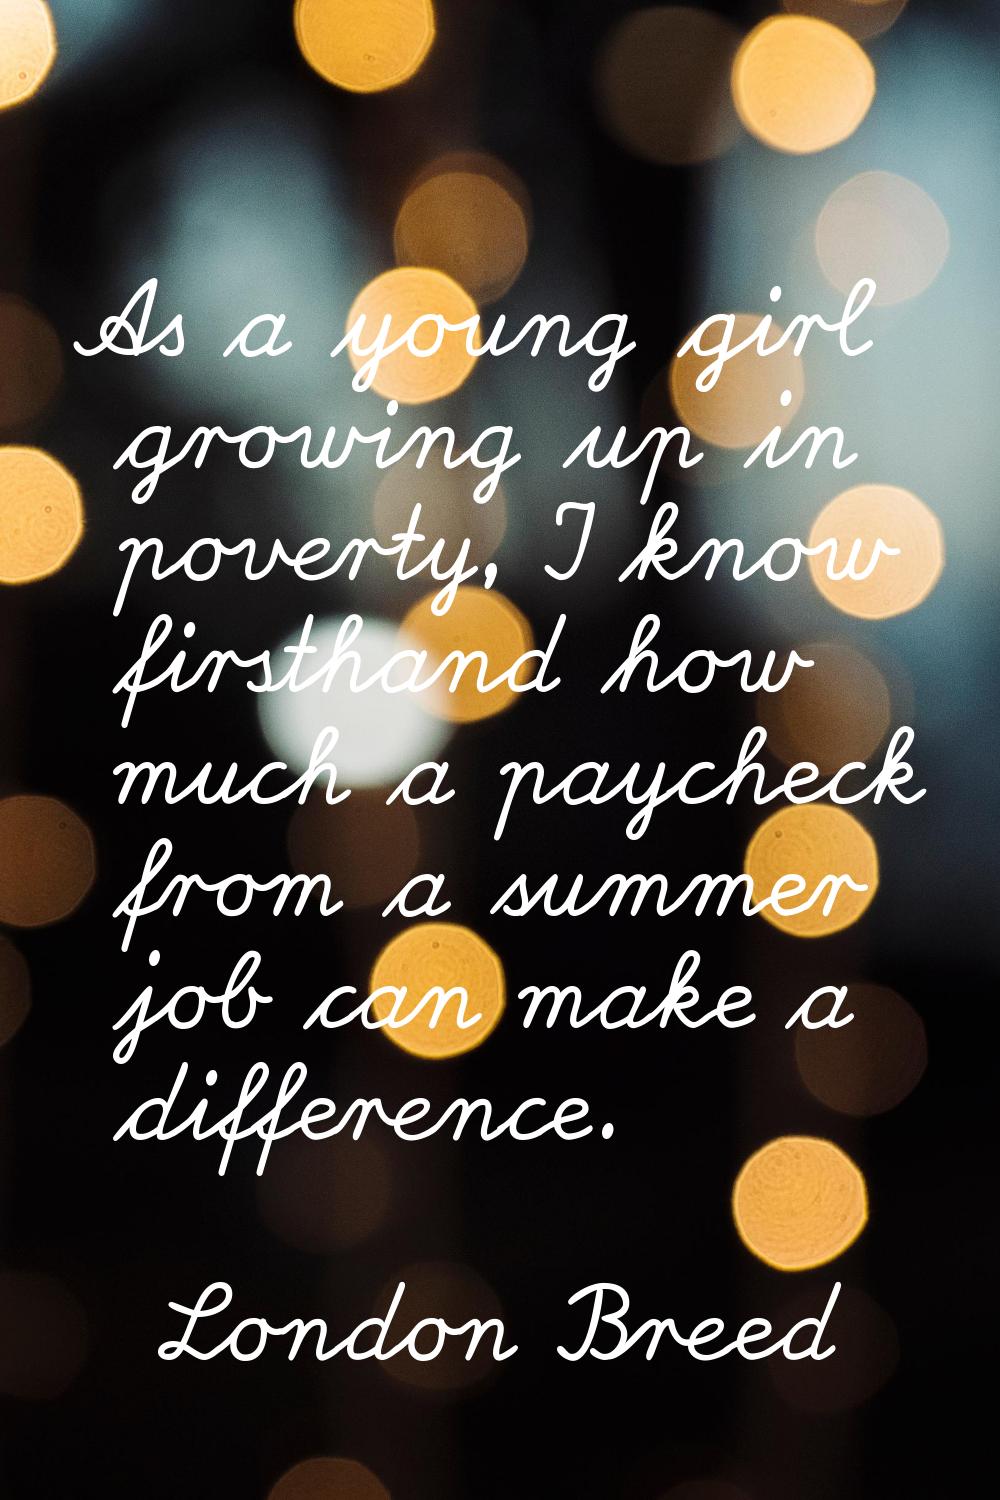 As a young girl growing up in poverty, I know firsthand how much a paycheck from a summer job can m